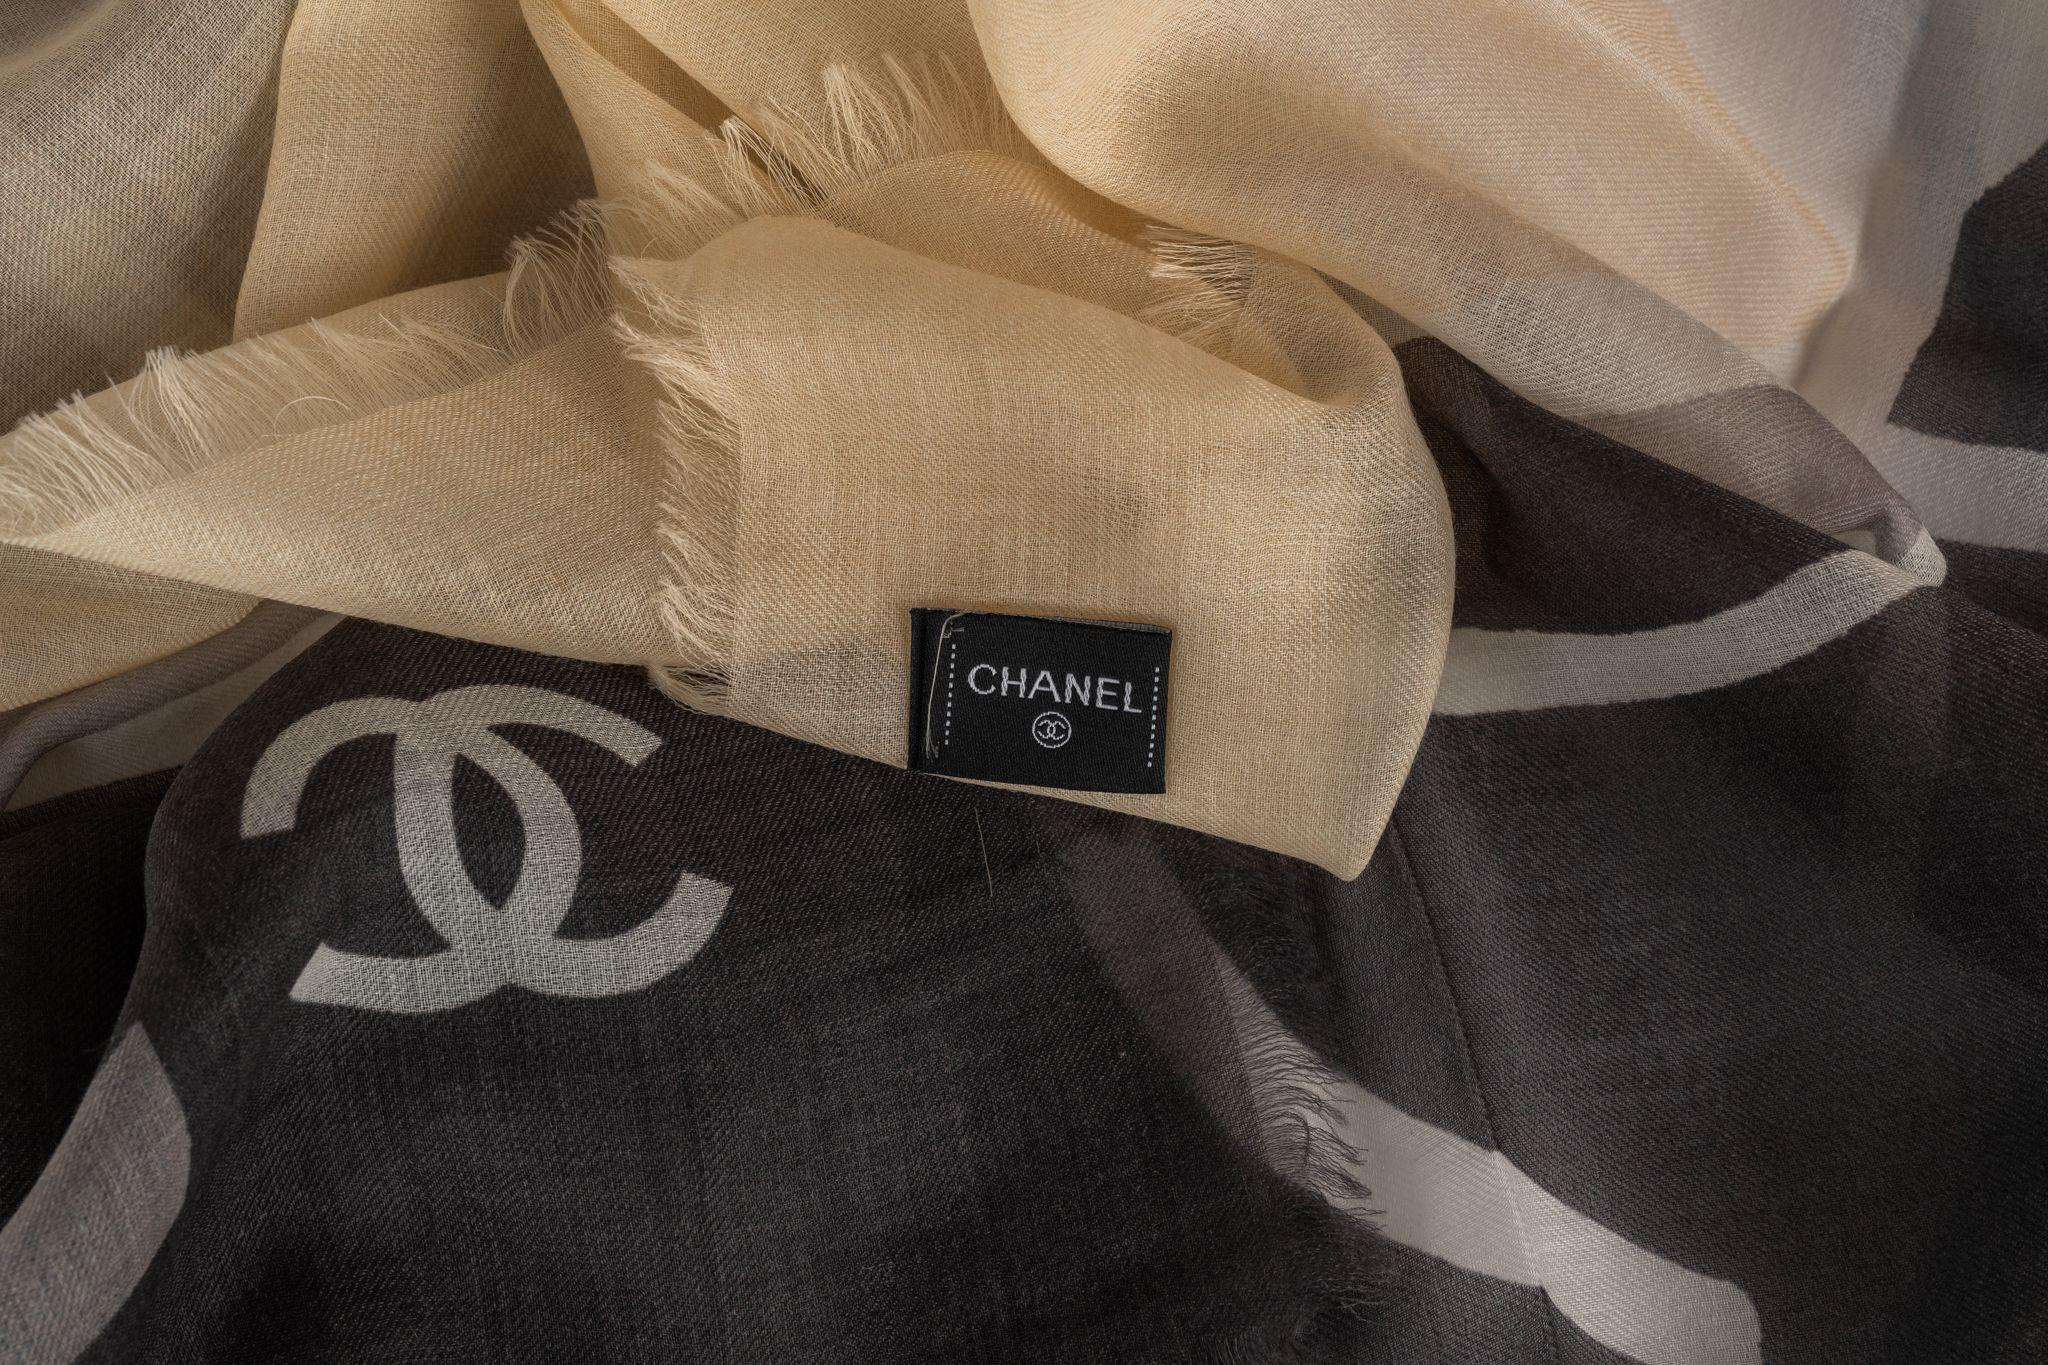 Women's Chanel New Cashmere Shawl Pop Art For Sale